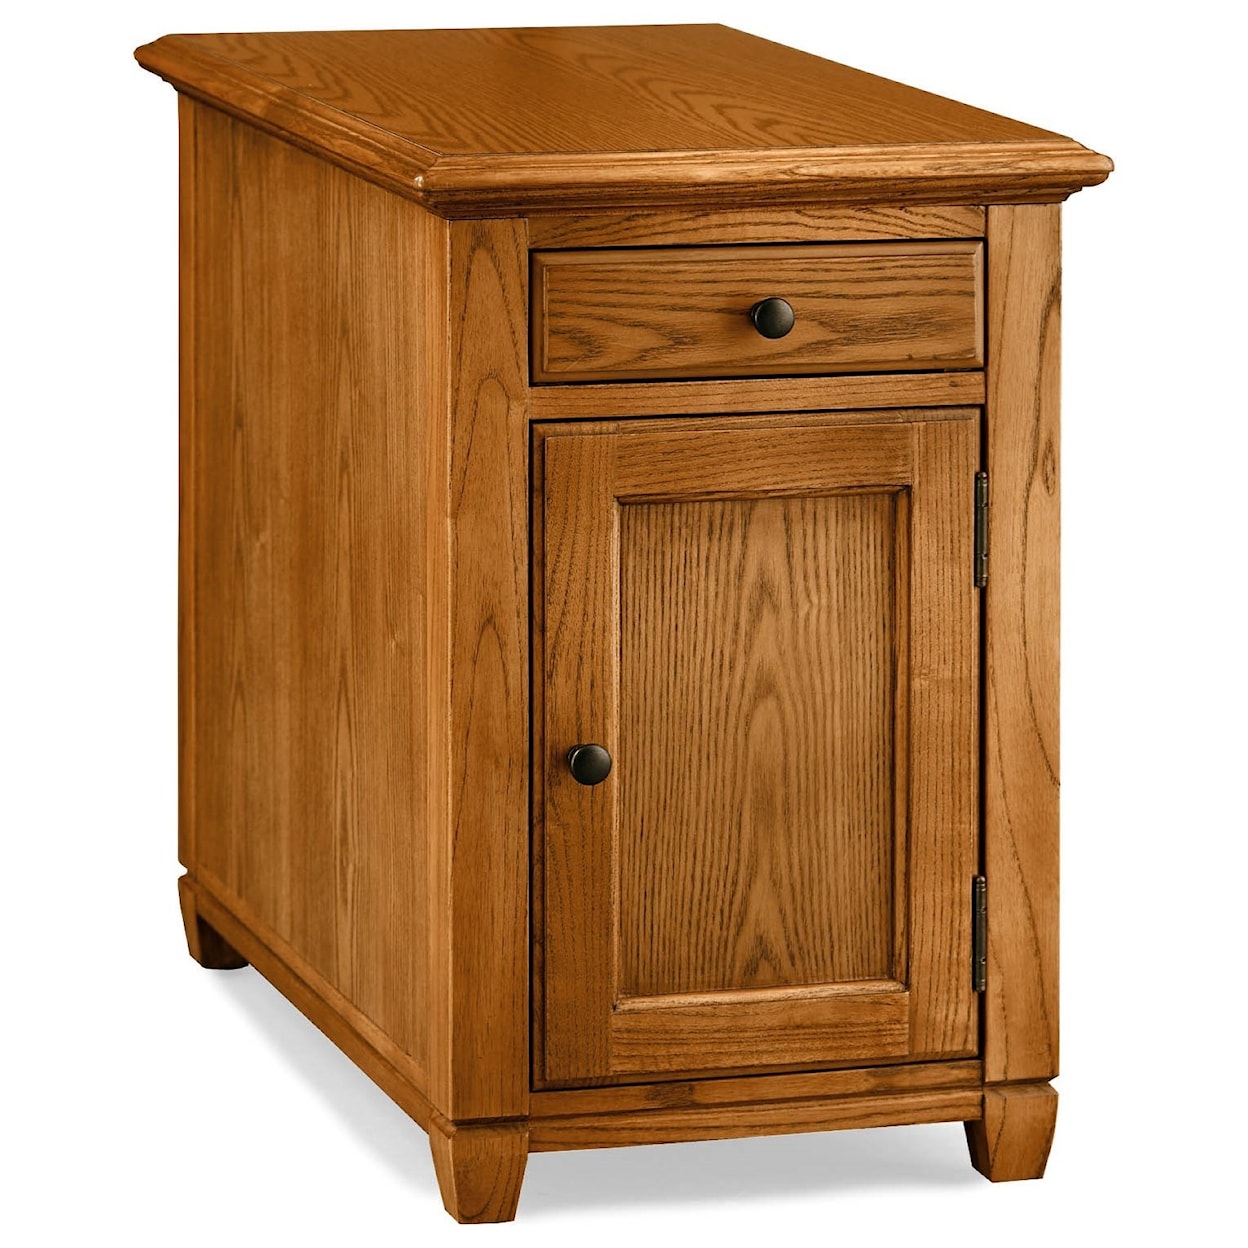 Peters Revington WestEnd Chairside Cabinet